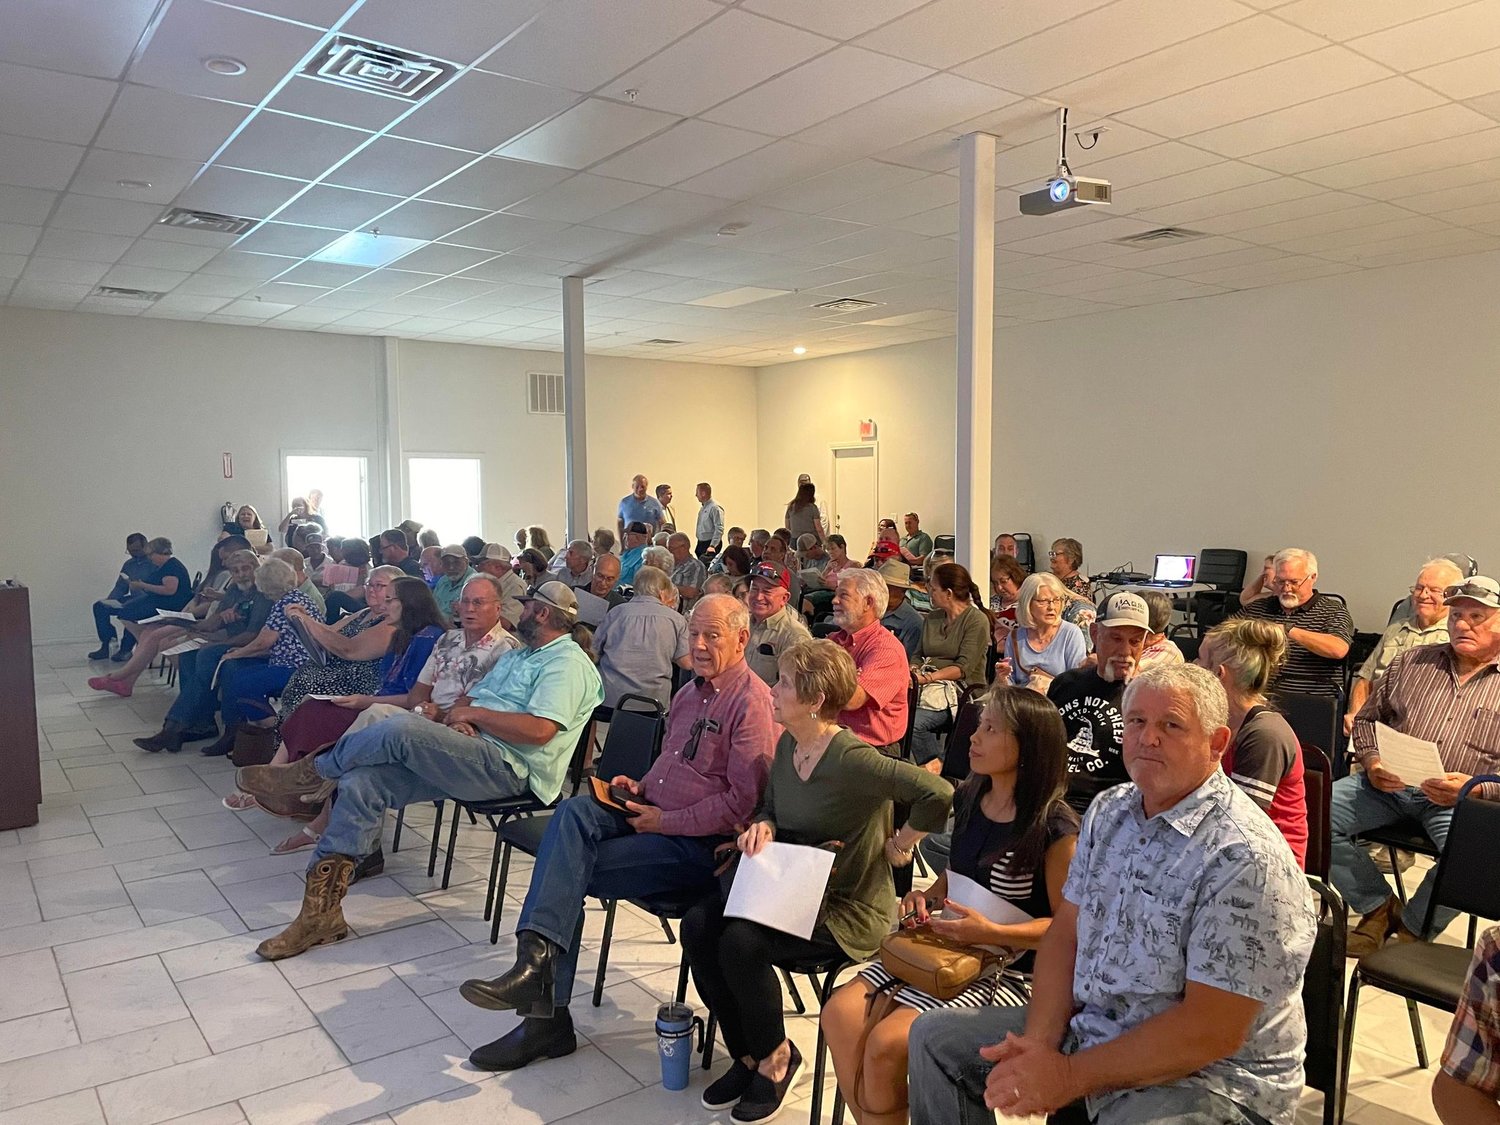 Mike Berlanga, a CPA, LREB & property tax expert, said the event was successful with “standing room only” as dozens of Gonzales County residents came to learn more about how to understand the property tax protest process, how to file an appeal, the right to discovery of evidence and abritration versus litigation.